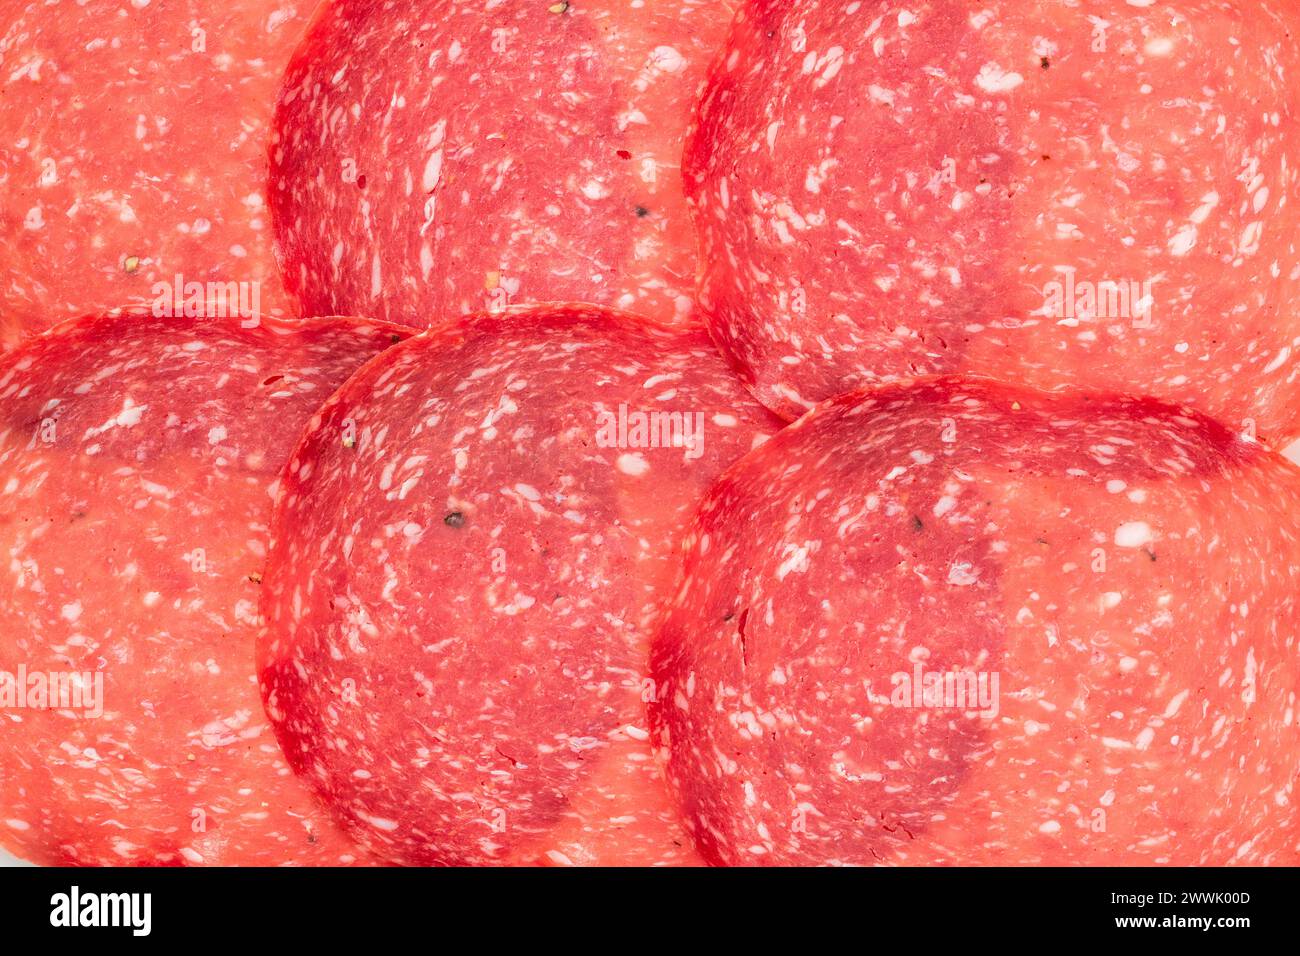 hungarian salami on the white background Stock Photo